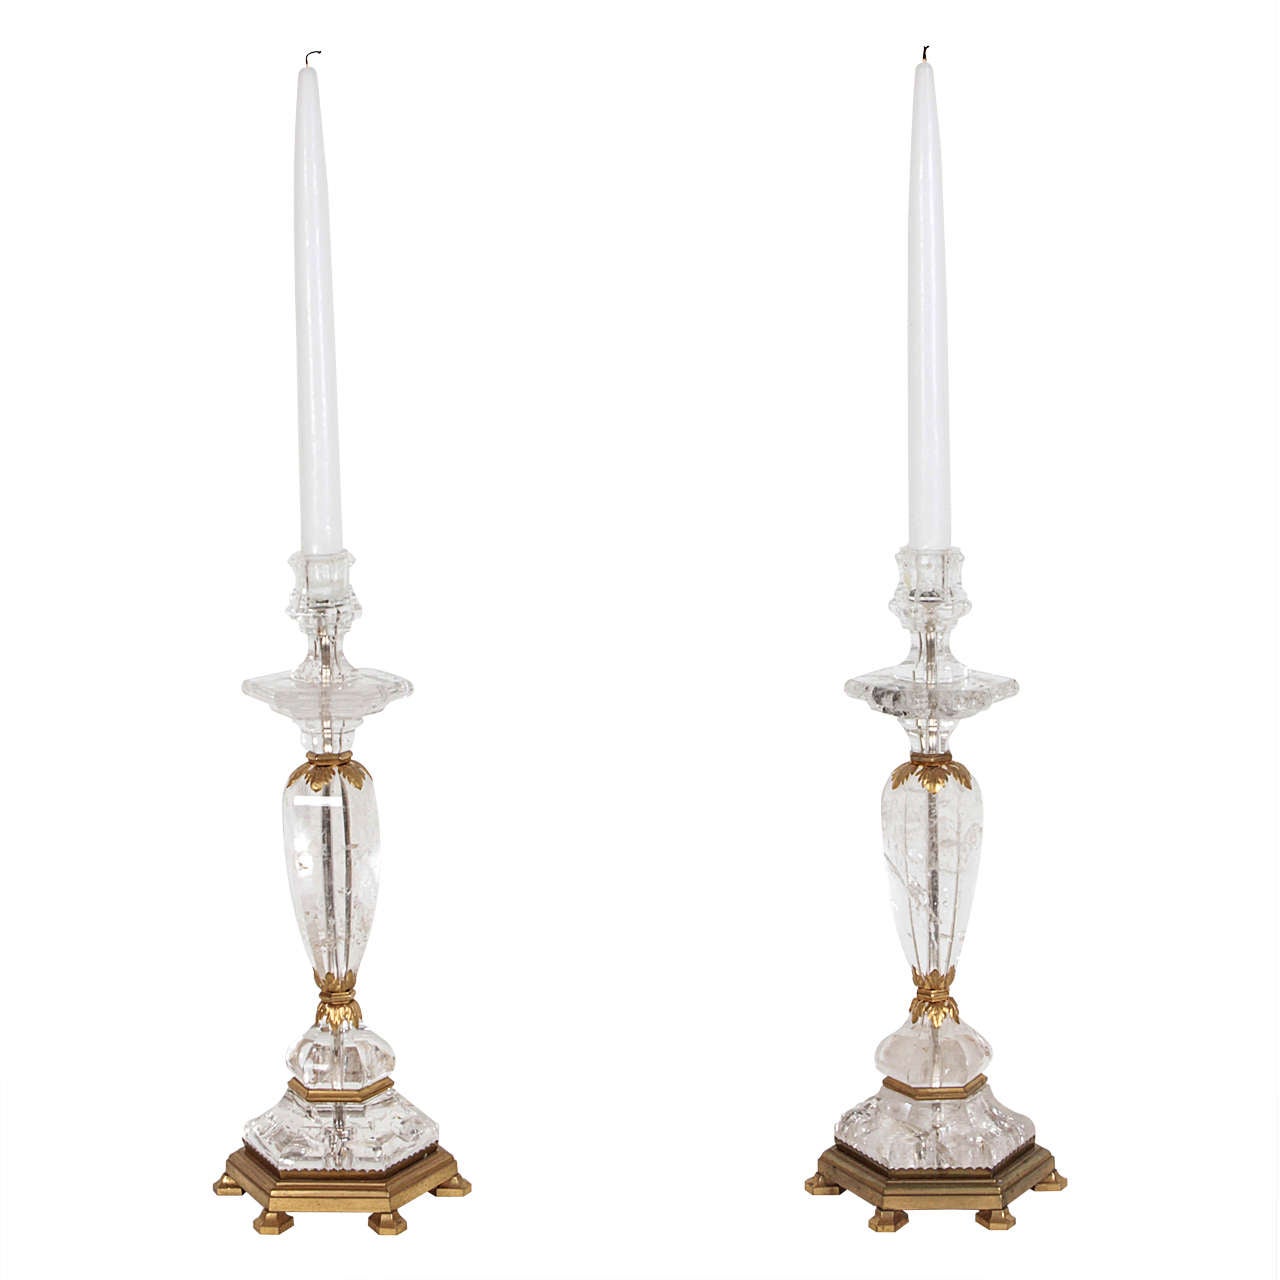 Pair of French Rock-Crystal and Gilt-Bronze Candlesticks Circa 1950